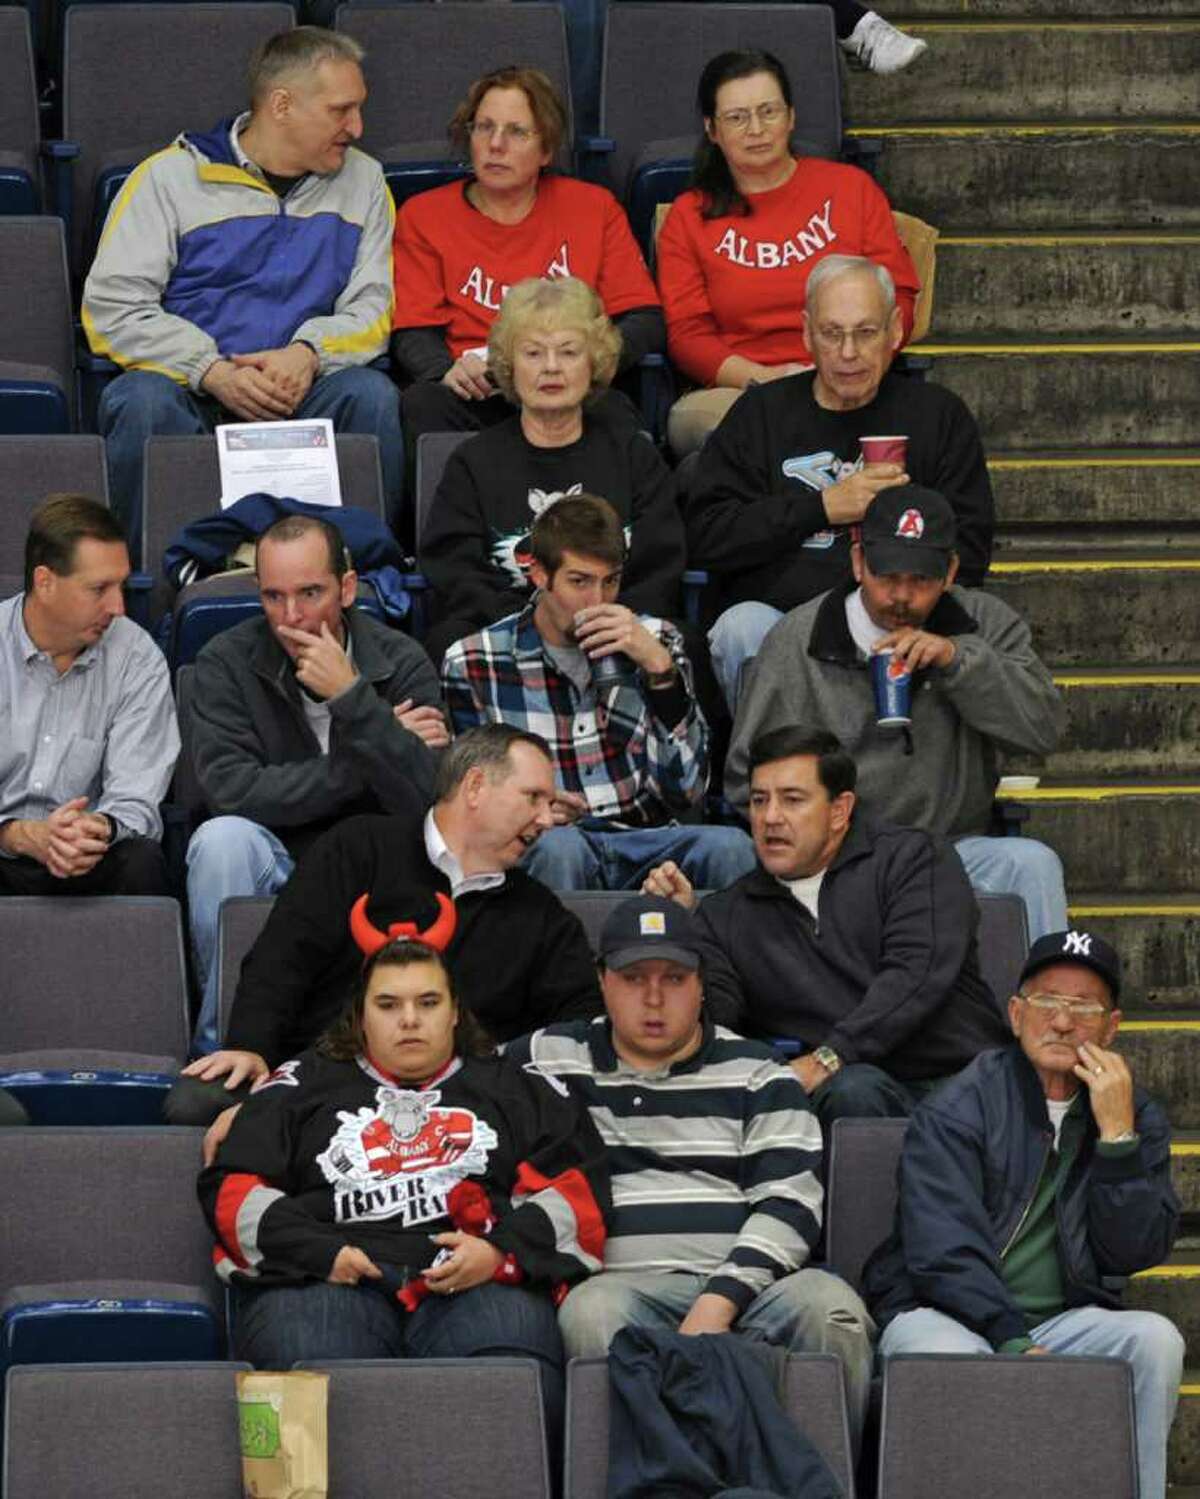 Fans out for the Albany Devils game still wore River Rats jerseys. (Lori Van Buren / Times Union)